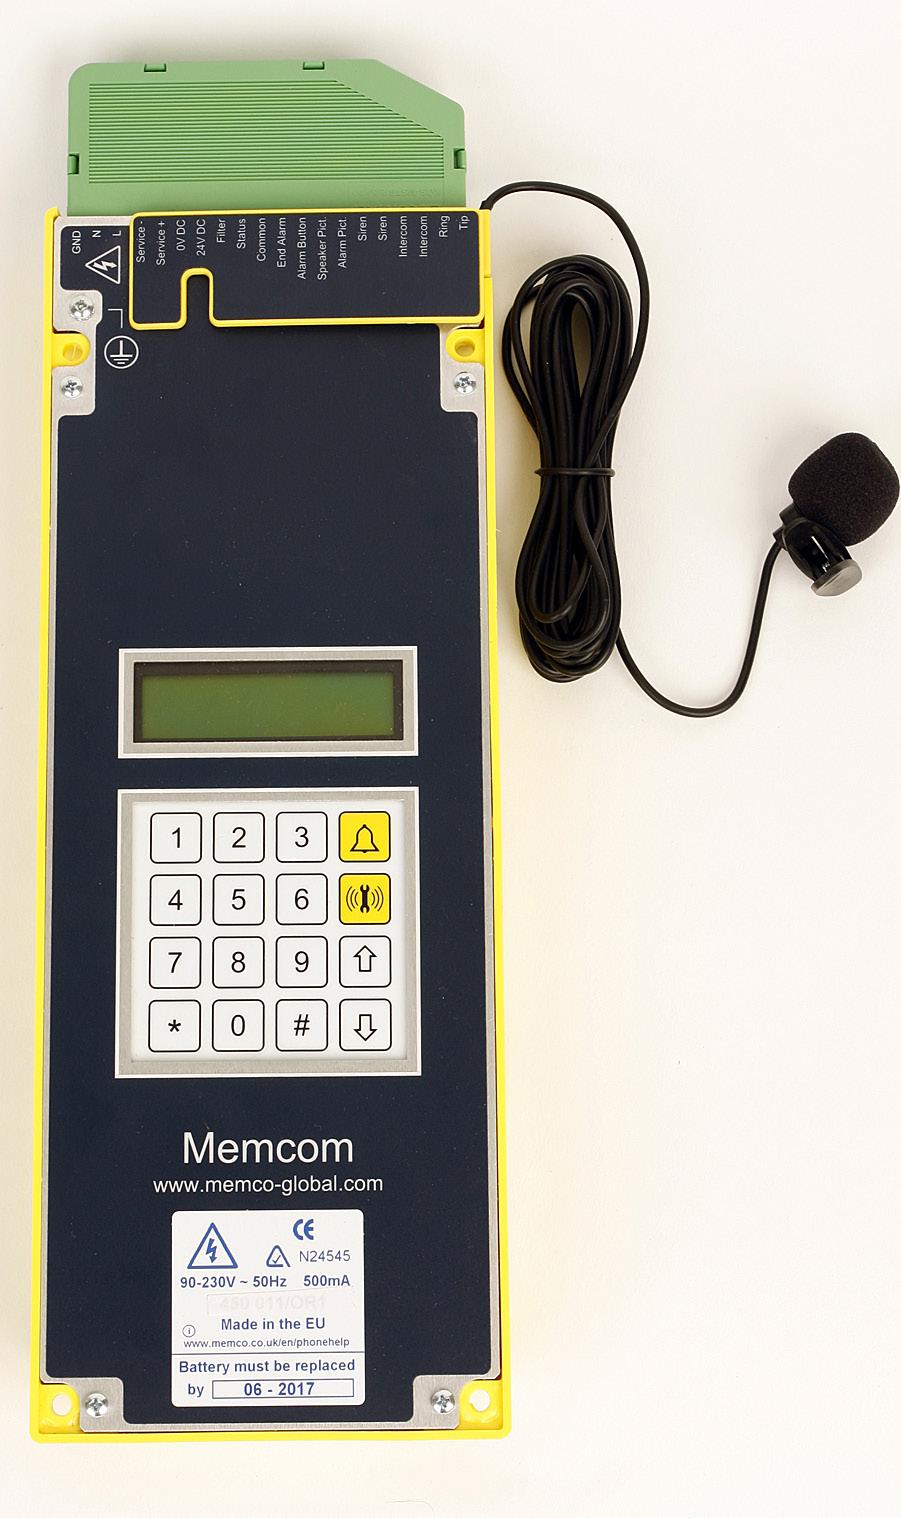 Memcom + Emergency Telephone Contents Page Page(s) Installation 3-4 Quick Start Programming 6 Testing and Operating 7 Full Programming Options 8-14 Troubleshooting 15-16 Old Programming Mode 17